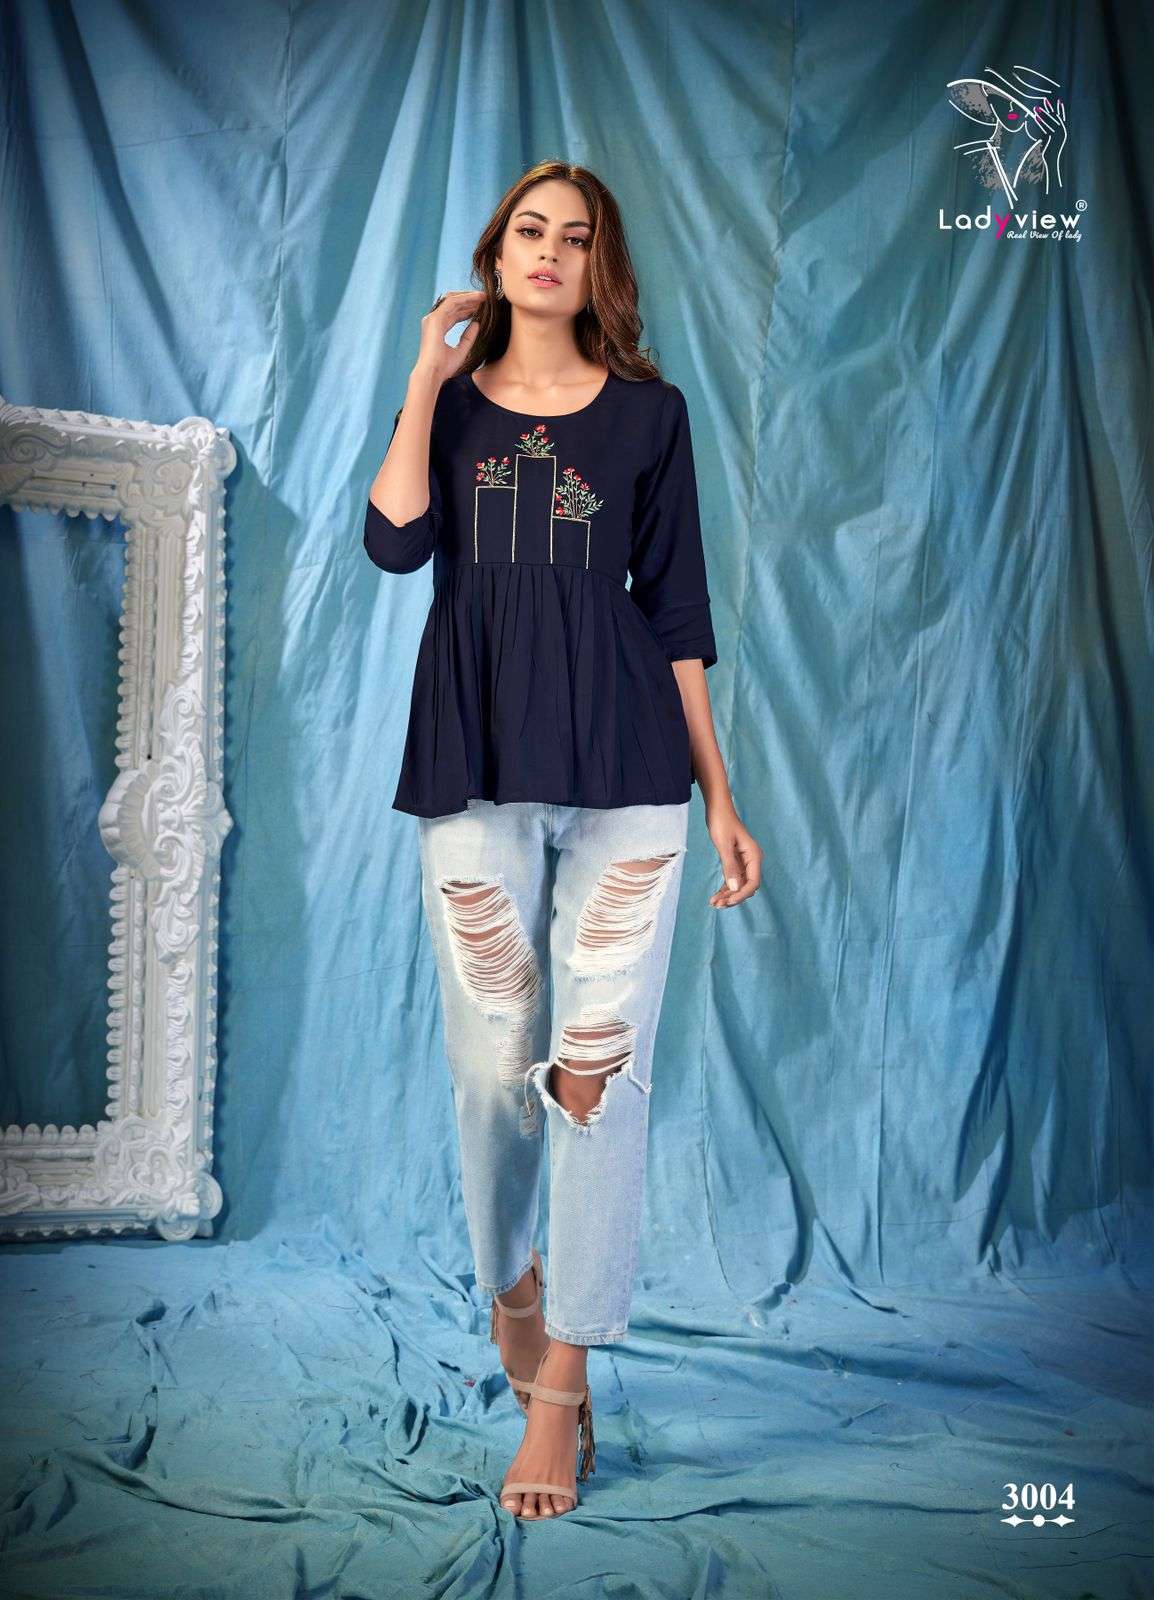 LADYVIEW PRESENTS COOL CRUSH VOL 3 HEAVY RAYON WHOLESALE TOPS